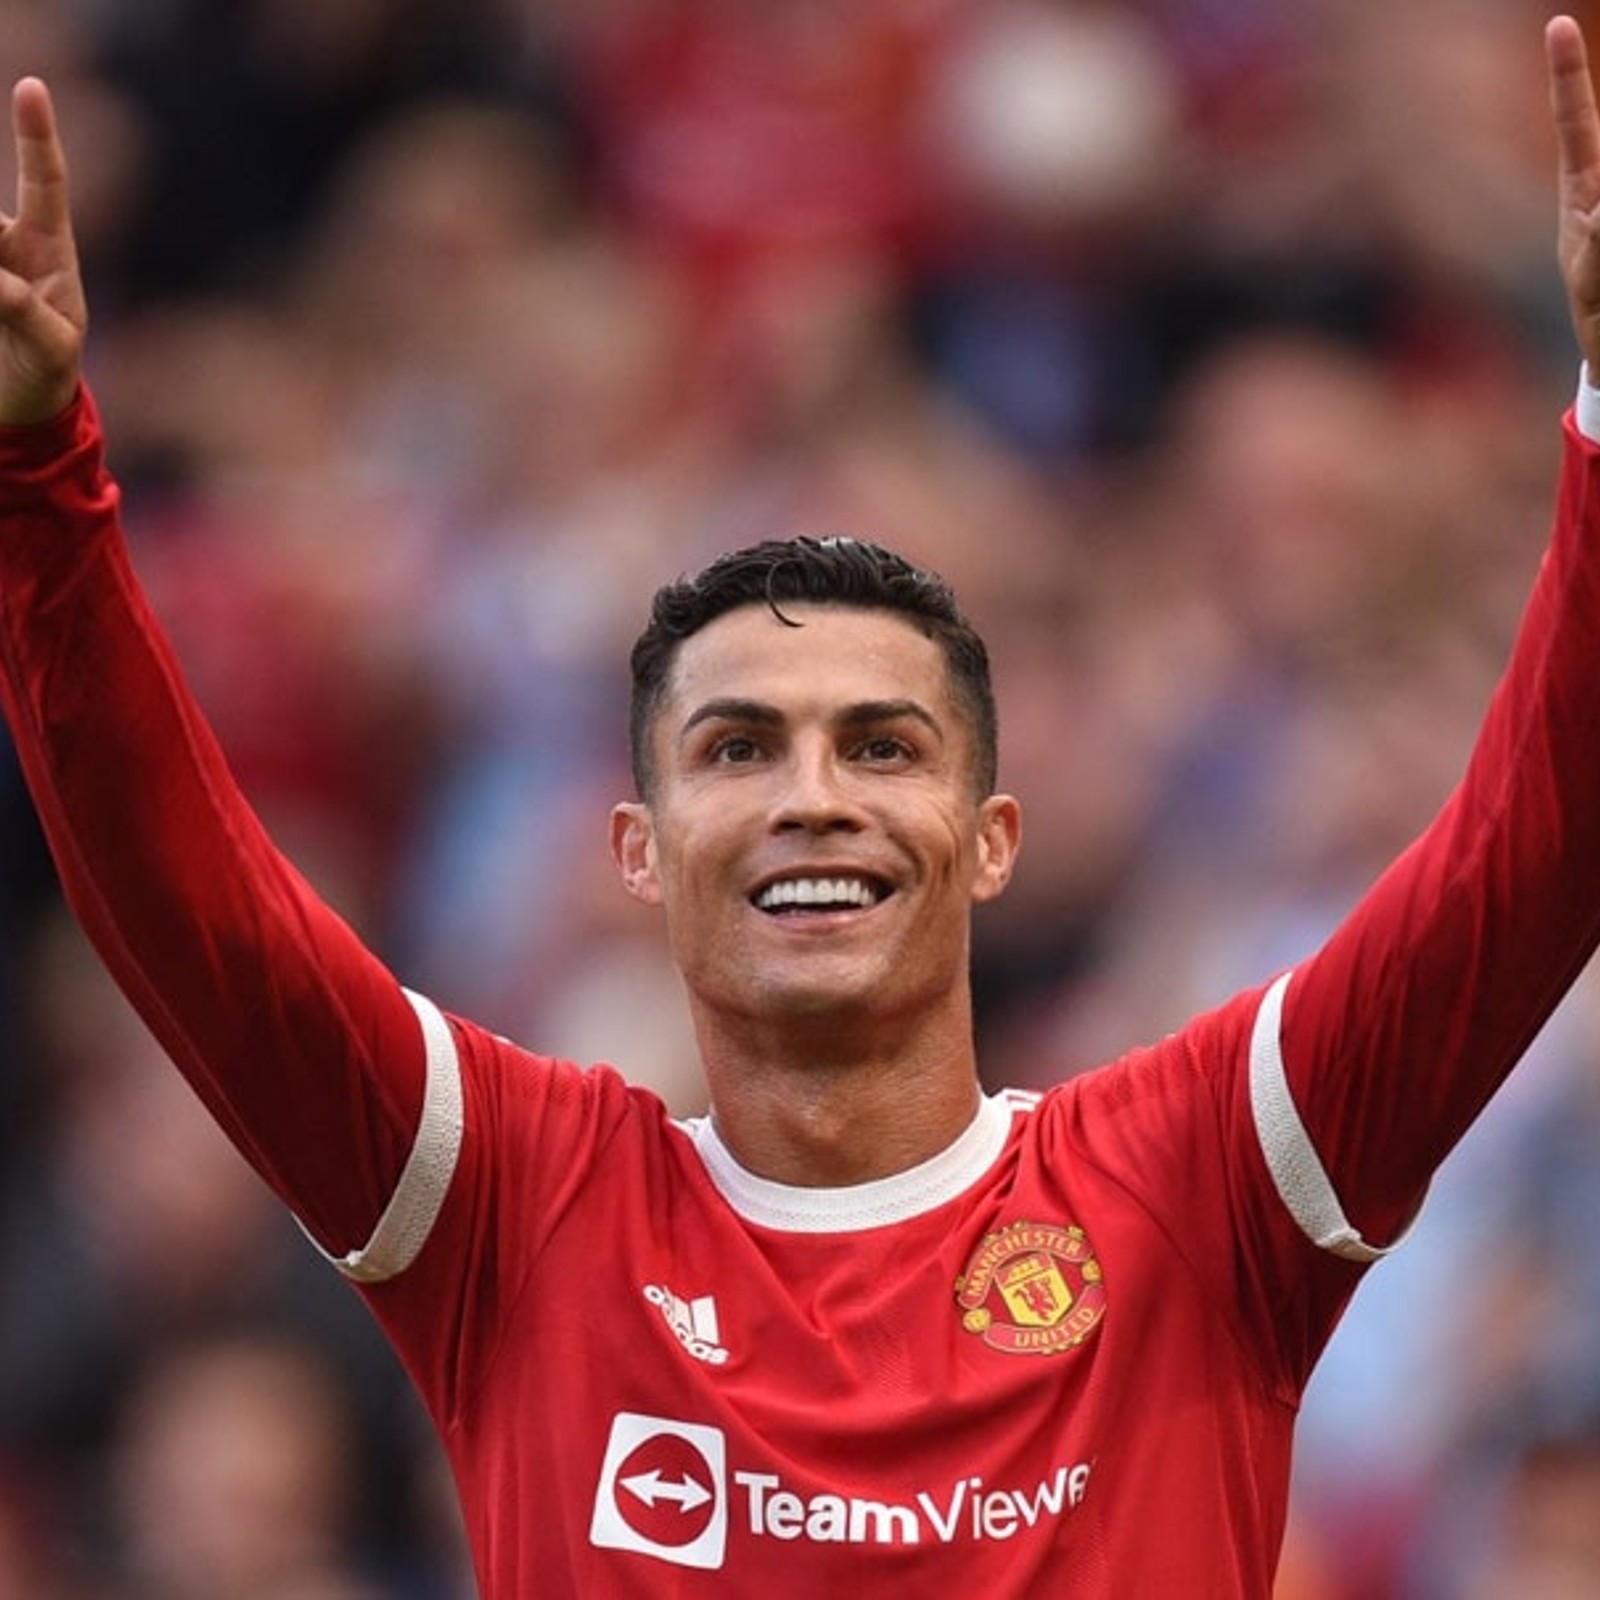 A School Drop-out, Cristiano Ronaldo Recruited by Manchester United at Age 16